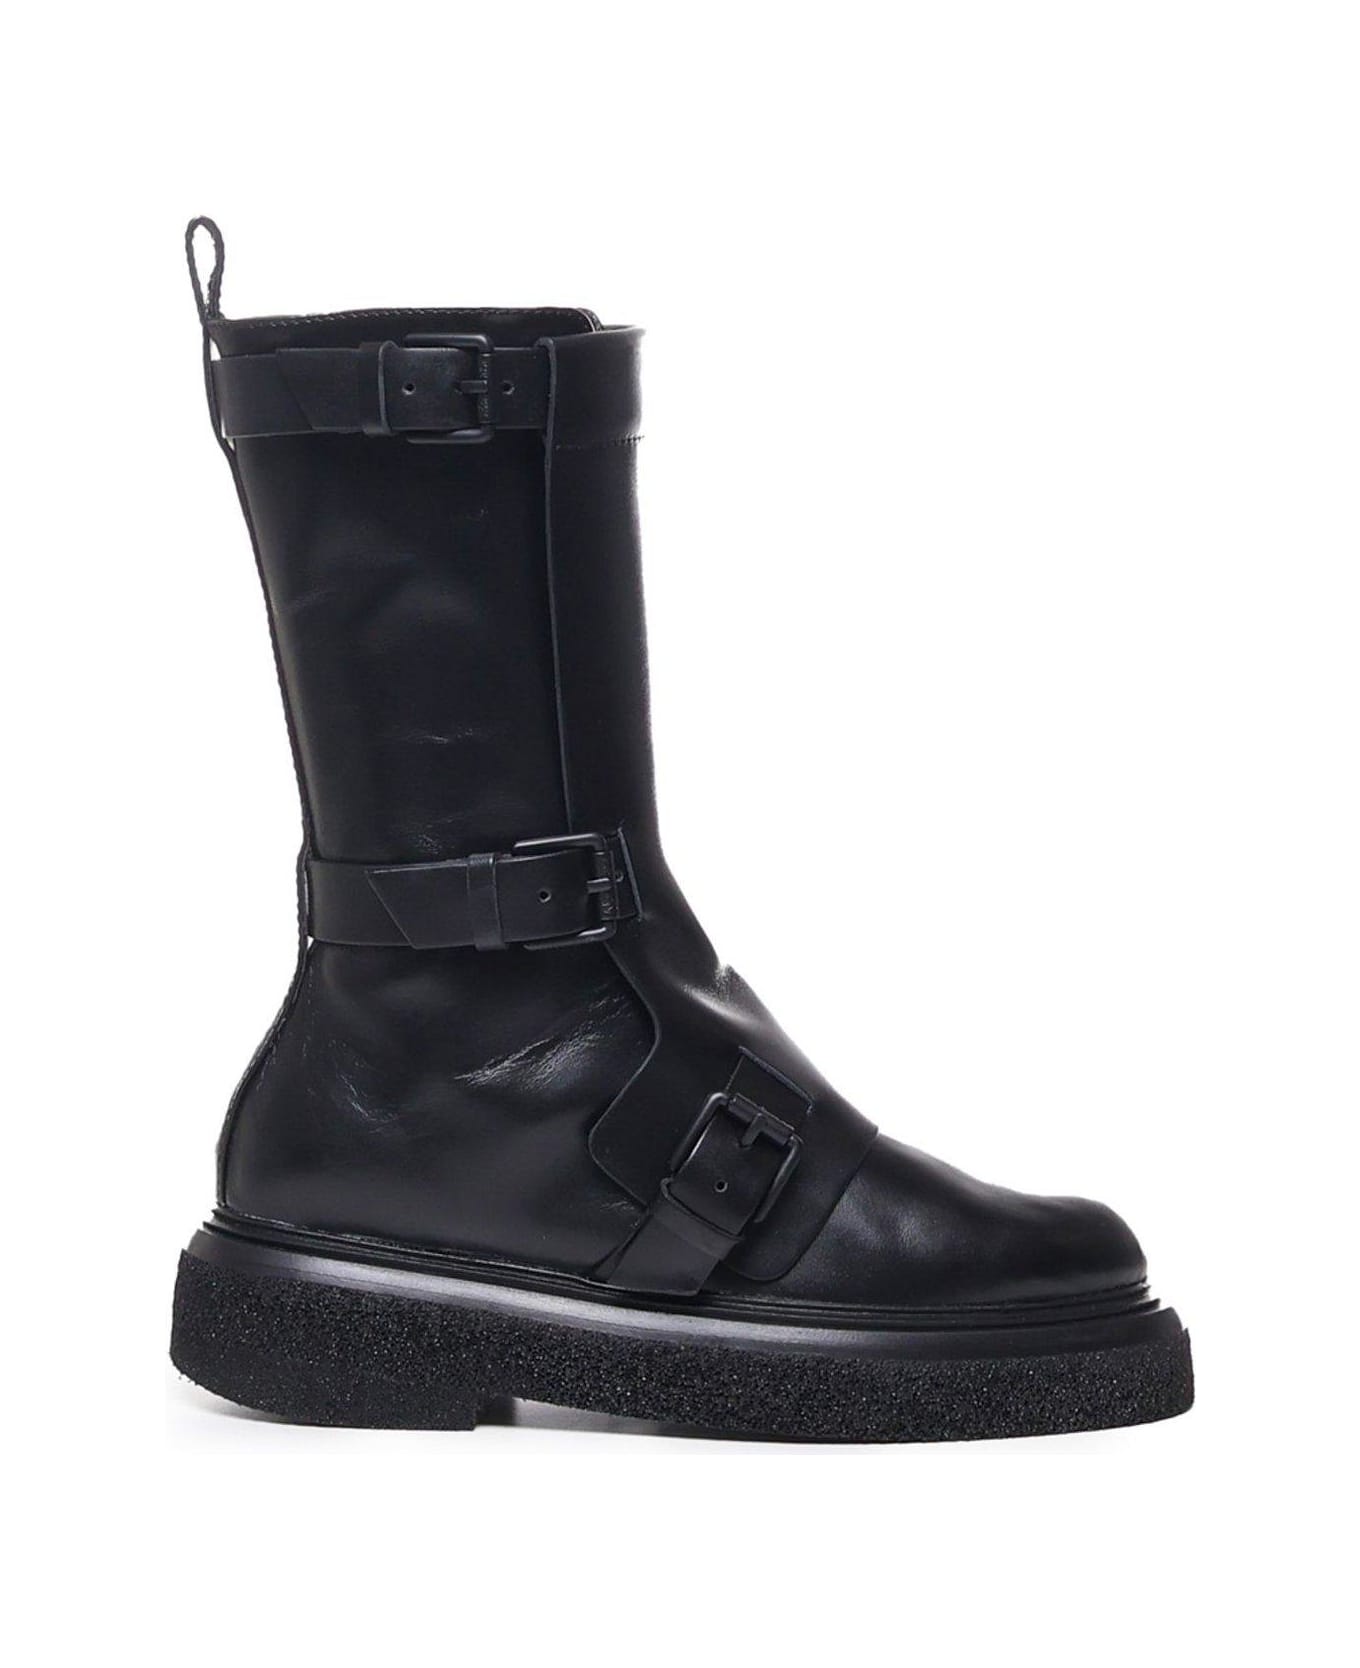 Max Mara Buckled Detailed Round Toe Boots - Black